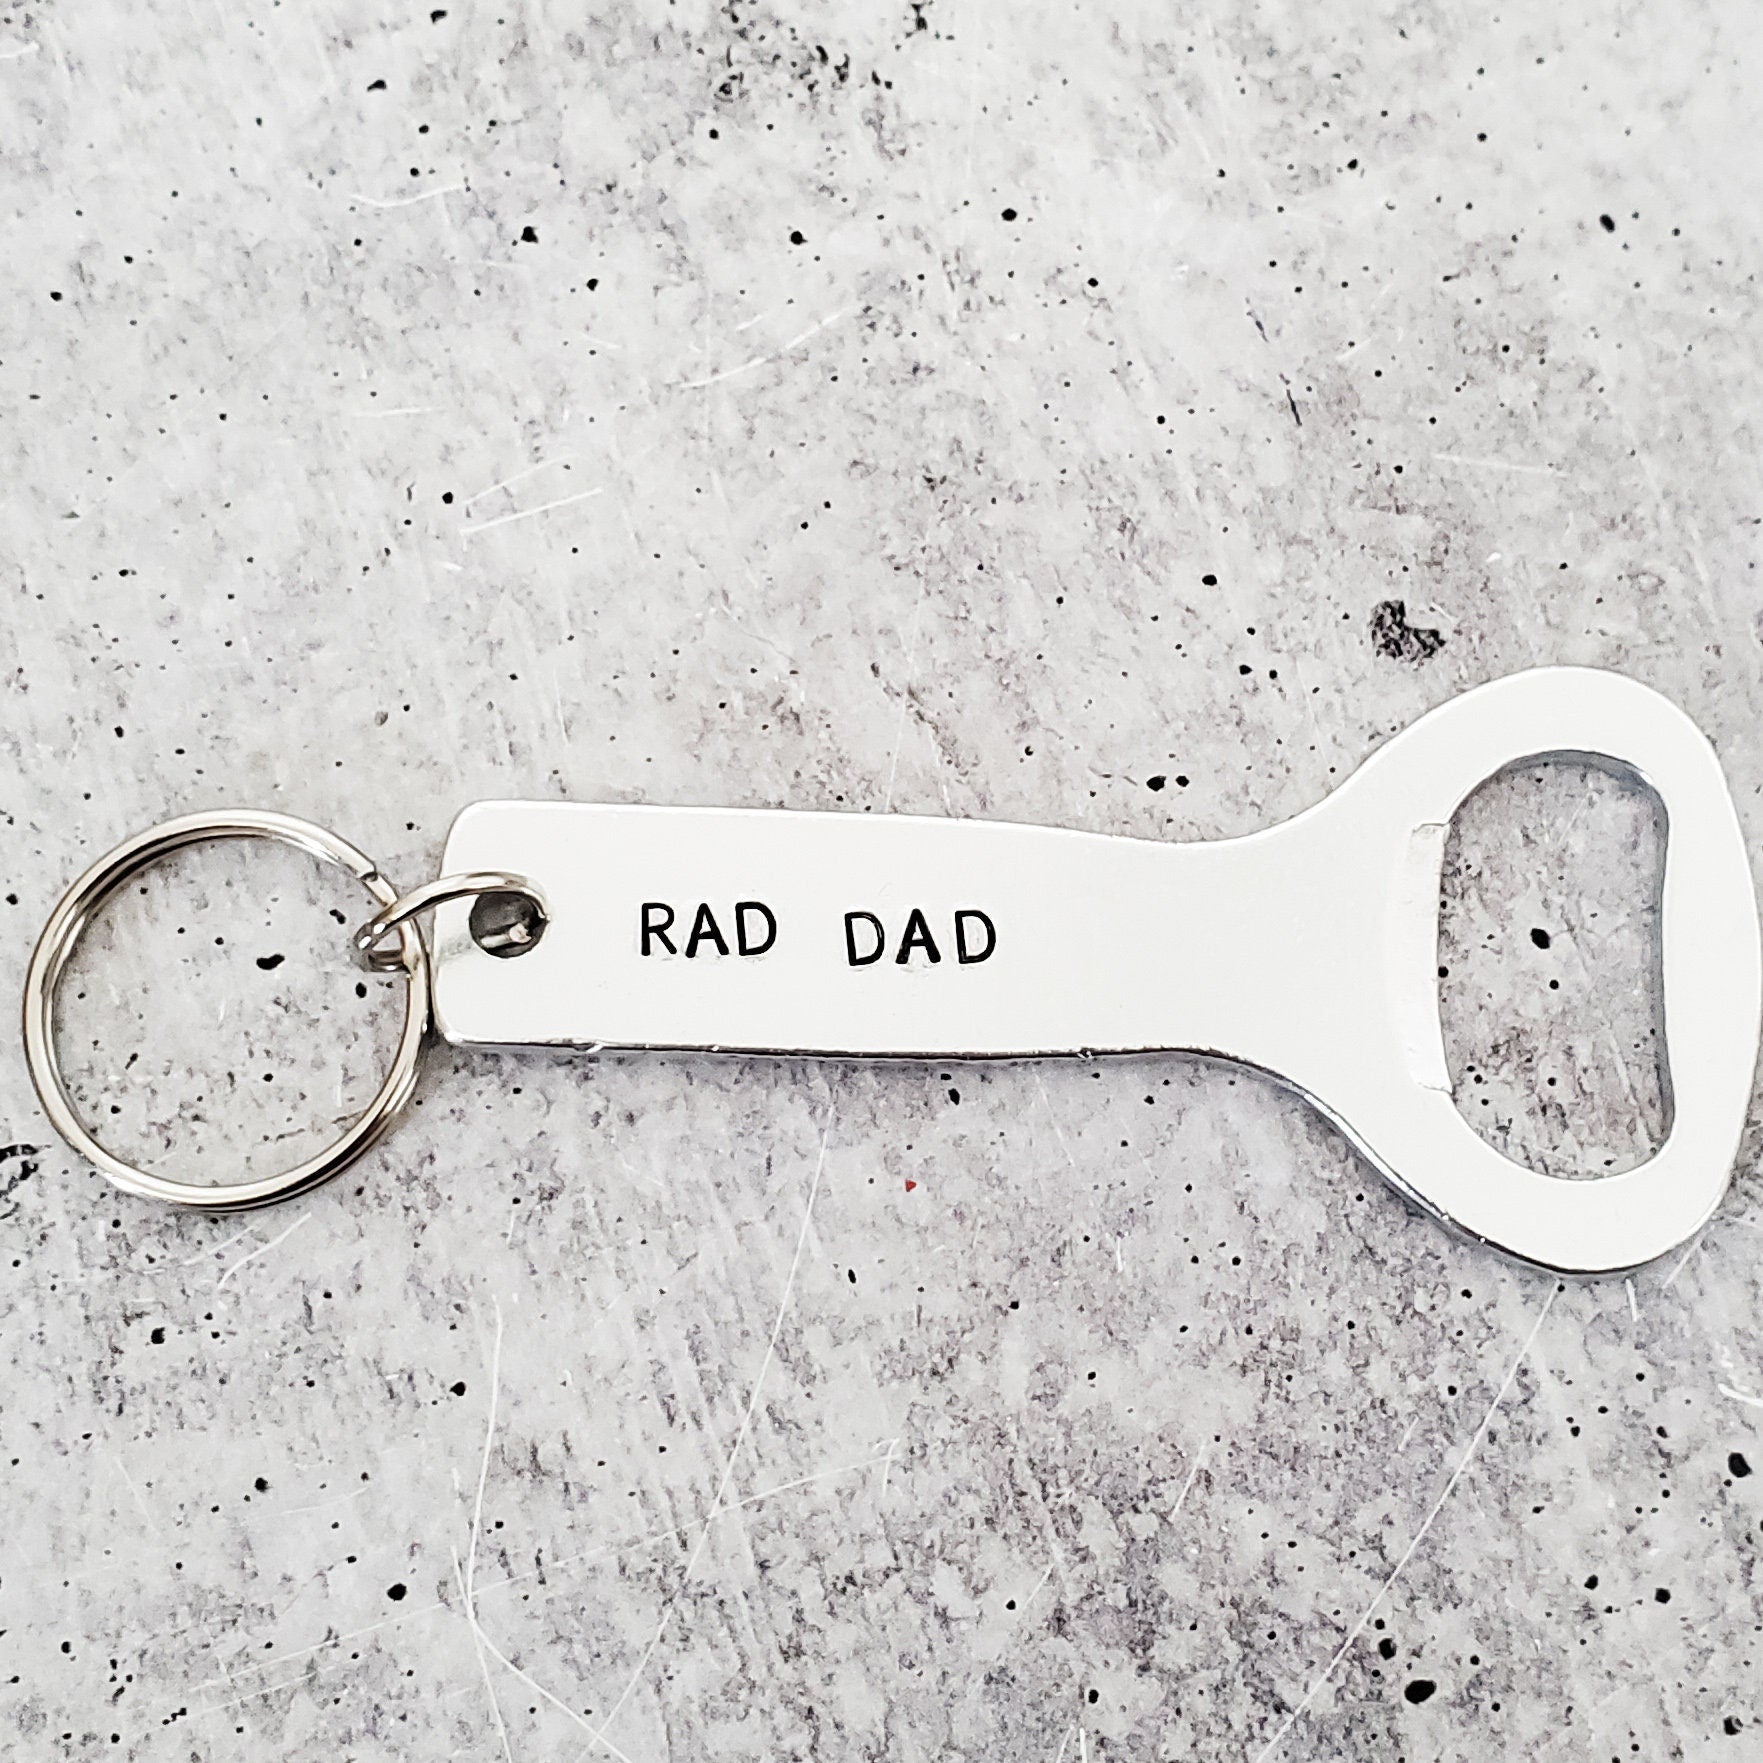 Rad Dad Keychain - Rad Dad Bottle Opener  - Father's Day Gift - Rad Dad Opener Keychain - Funny First Father's Day Gift for New Dad -